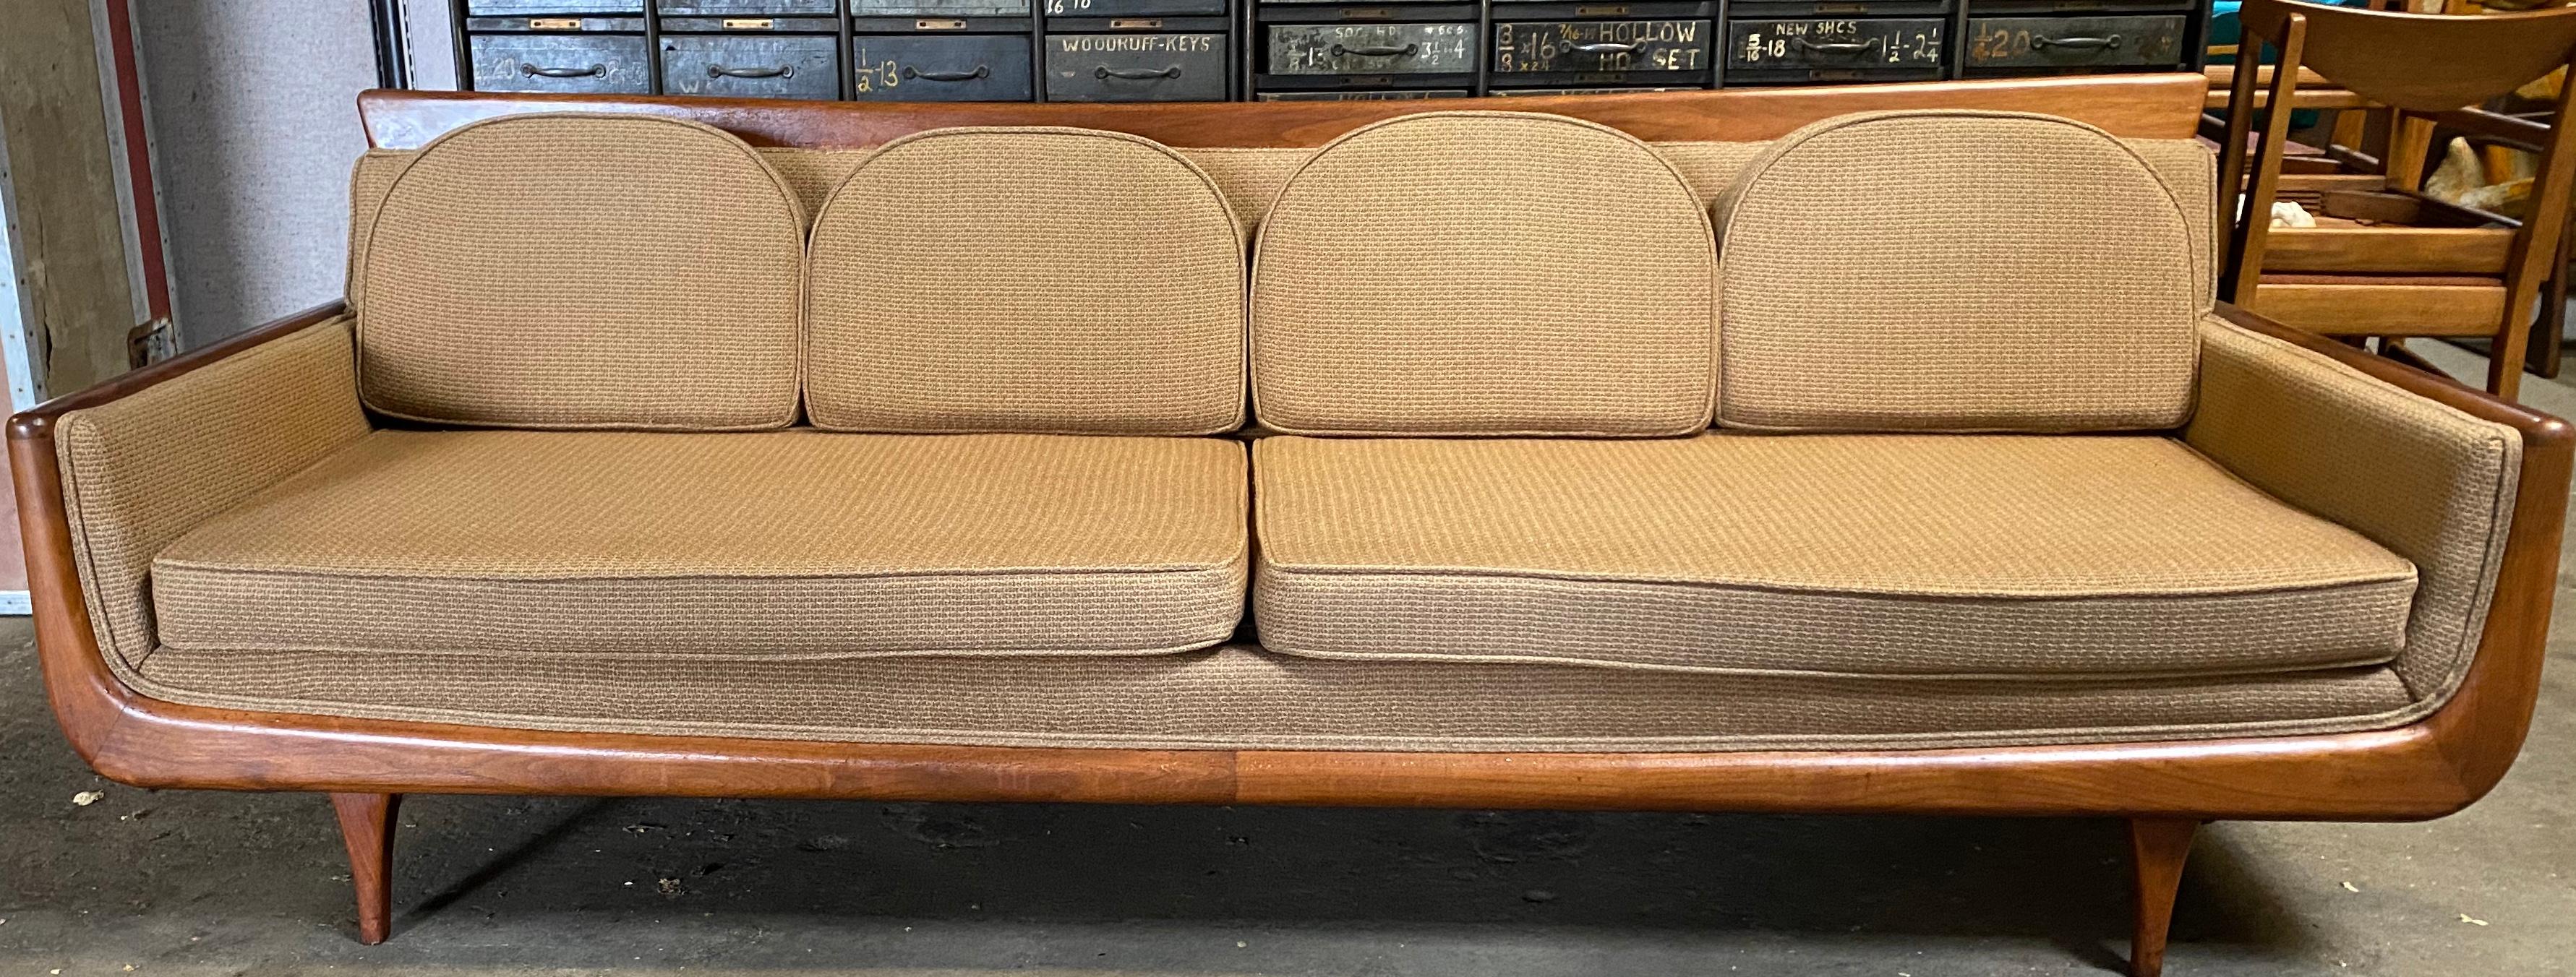 Handsome Mid-Century Modern sofa. Manner of Adrian Pearsall, unusual sculptural walnut frame. Designer. Maker unknown, retains original light brown wool fabric. In amazing condition, superior quality and construction. Classic Mid-Century Modern